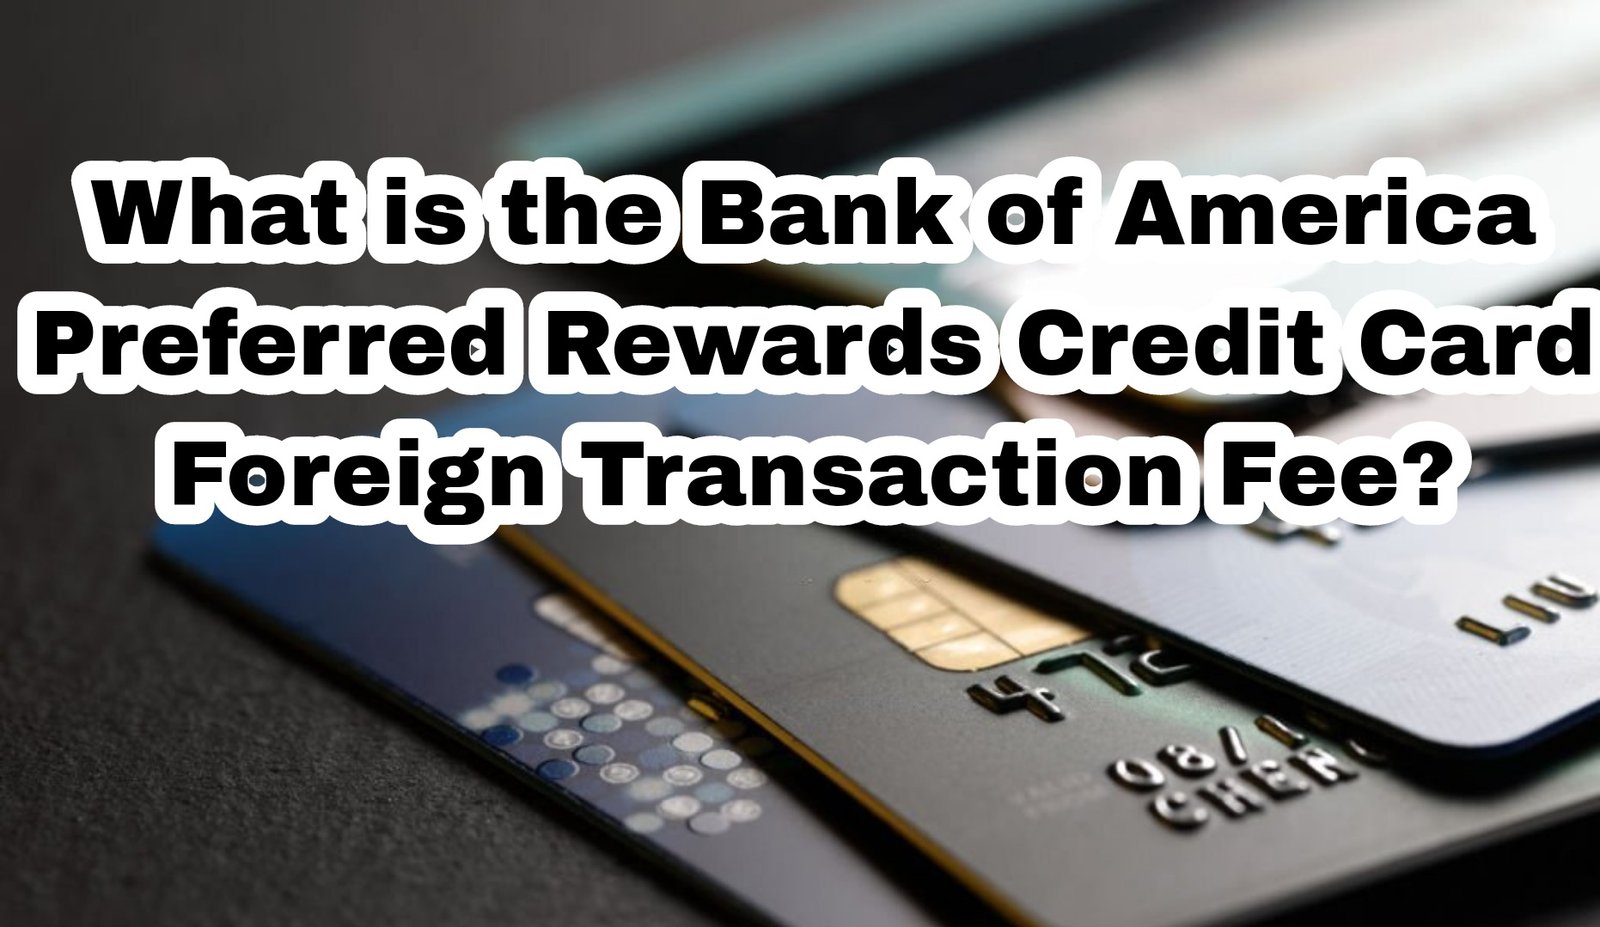 What is the Bank of America Preferred Rewards Credit Card Foreign Transaction Fee?